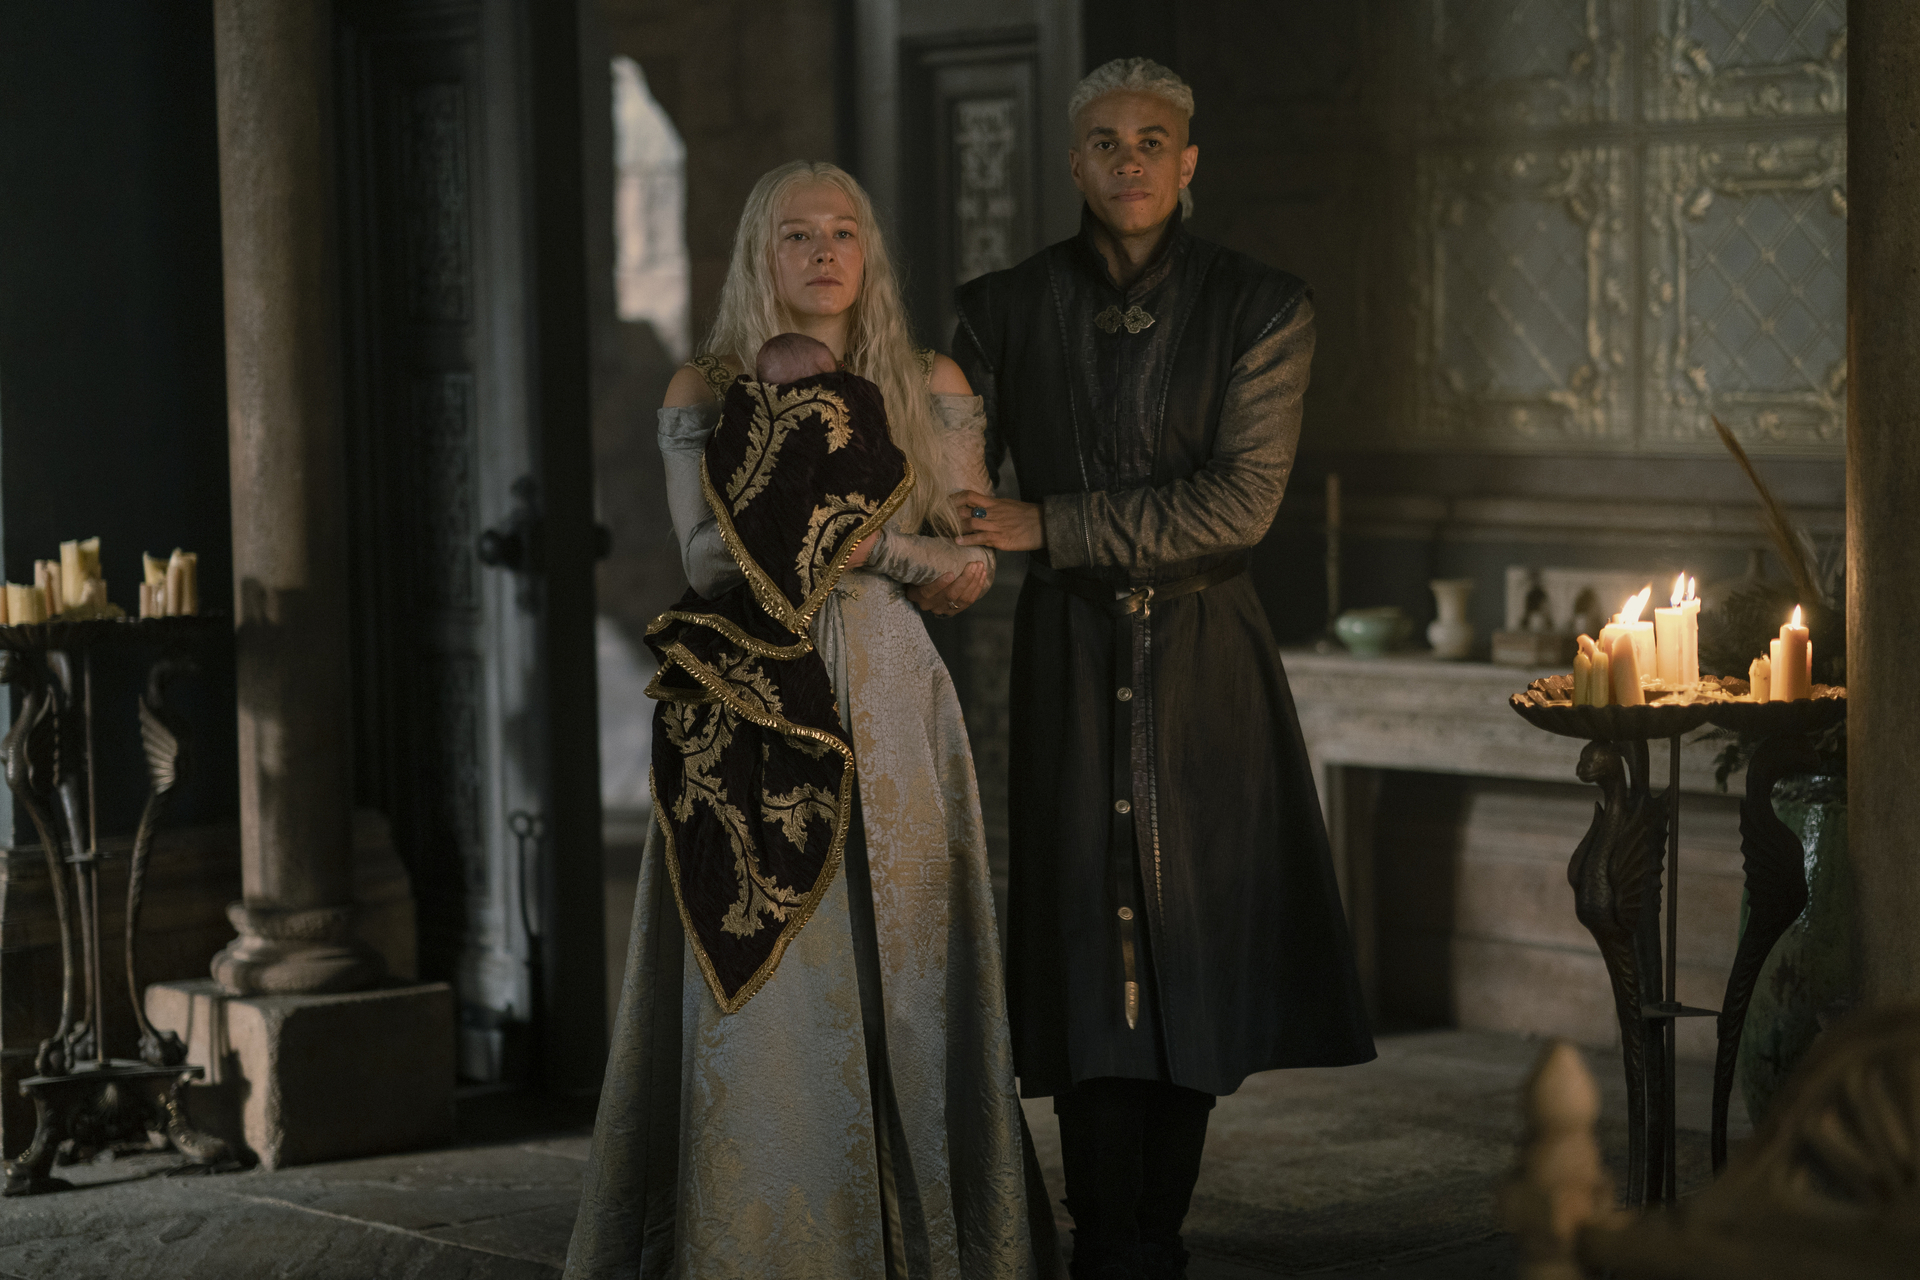 Emma D’Arcy and John MacMillan as Rhaenyra Targaryen and Ser Laenor Velaryon, respectively, standing in their chambers in House of the Dragon, with Rhaenyra holding a baby